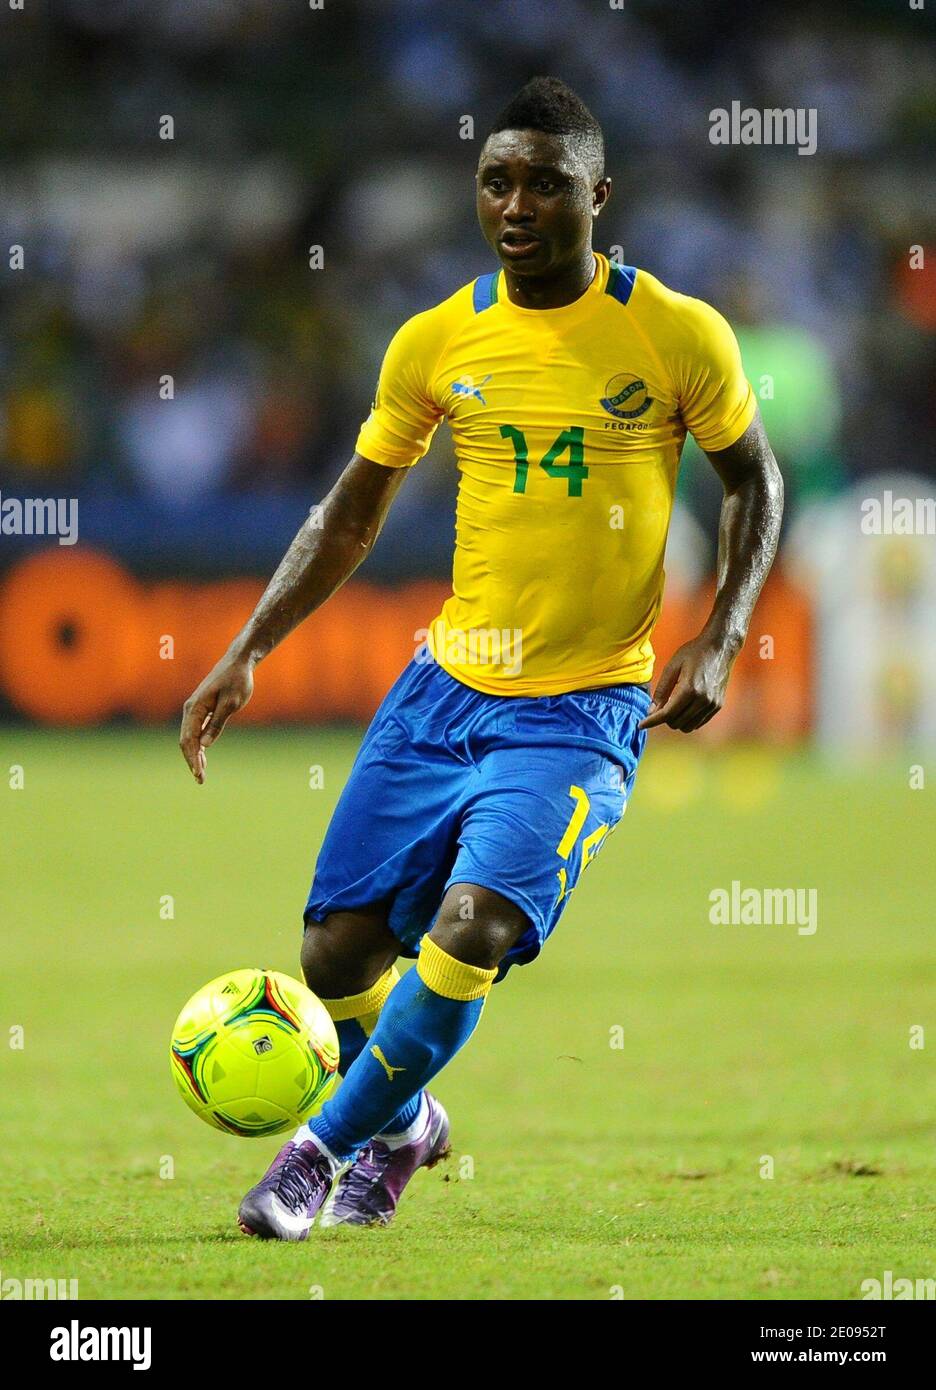 Gabon's Levy Madinda during the 2012 Africa Cup of Nations soccer match,  Gabon Vs Morocco at